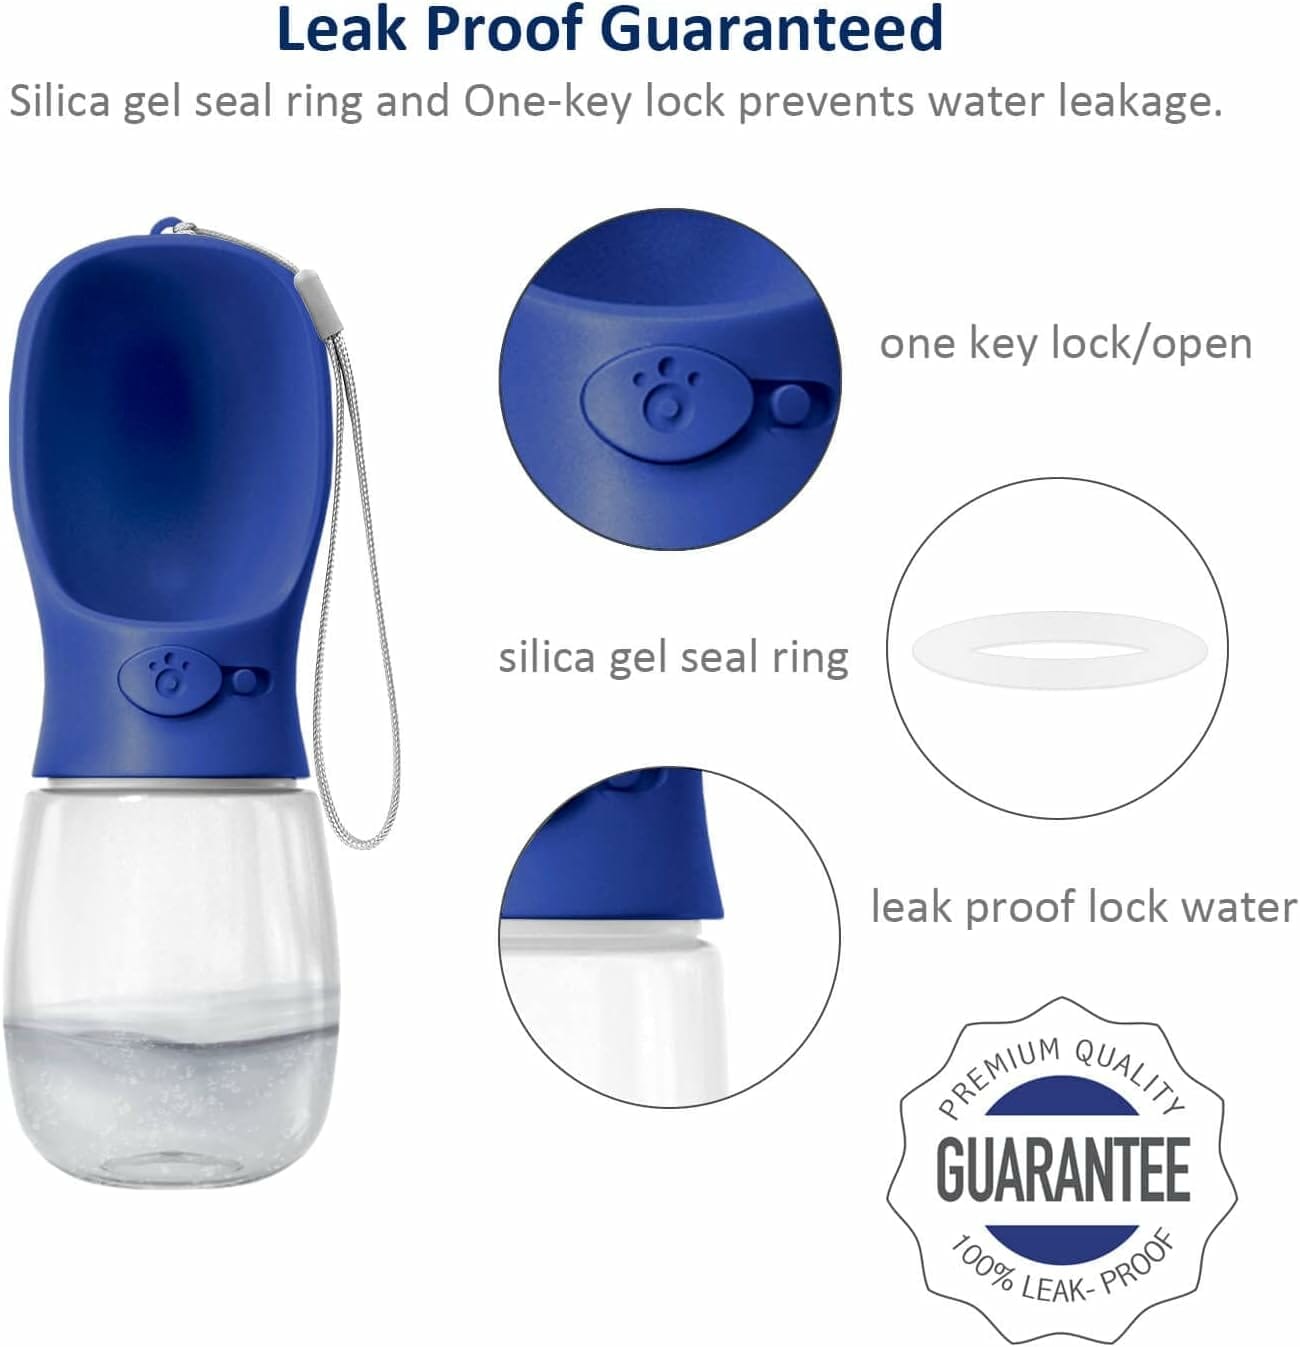 WePet Portable Dog Water Bottle Review